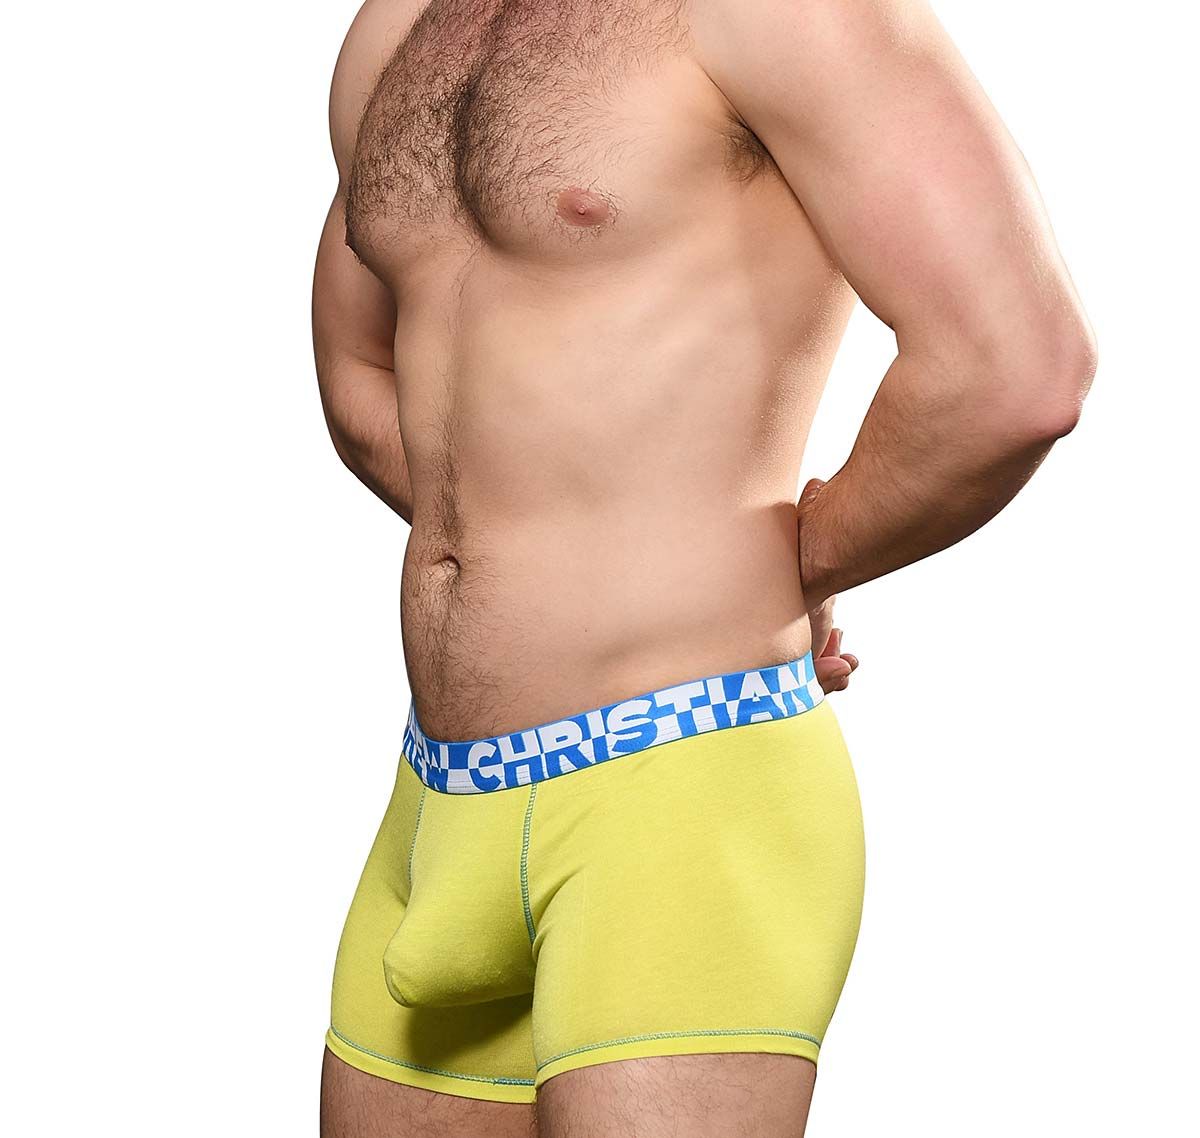 Andrew Christian Boxers ALMOST NAKED HANG-FREE BOXER 93019, yellow